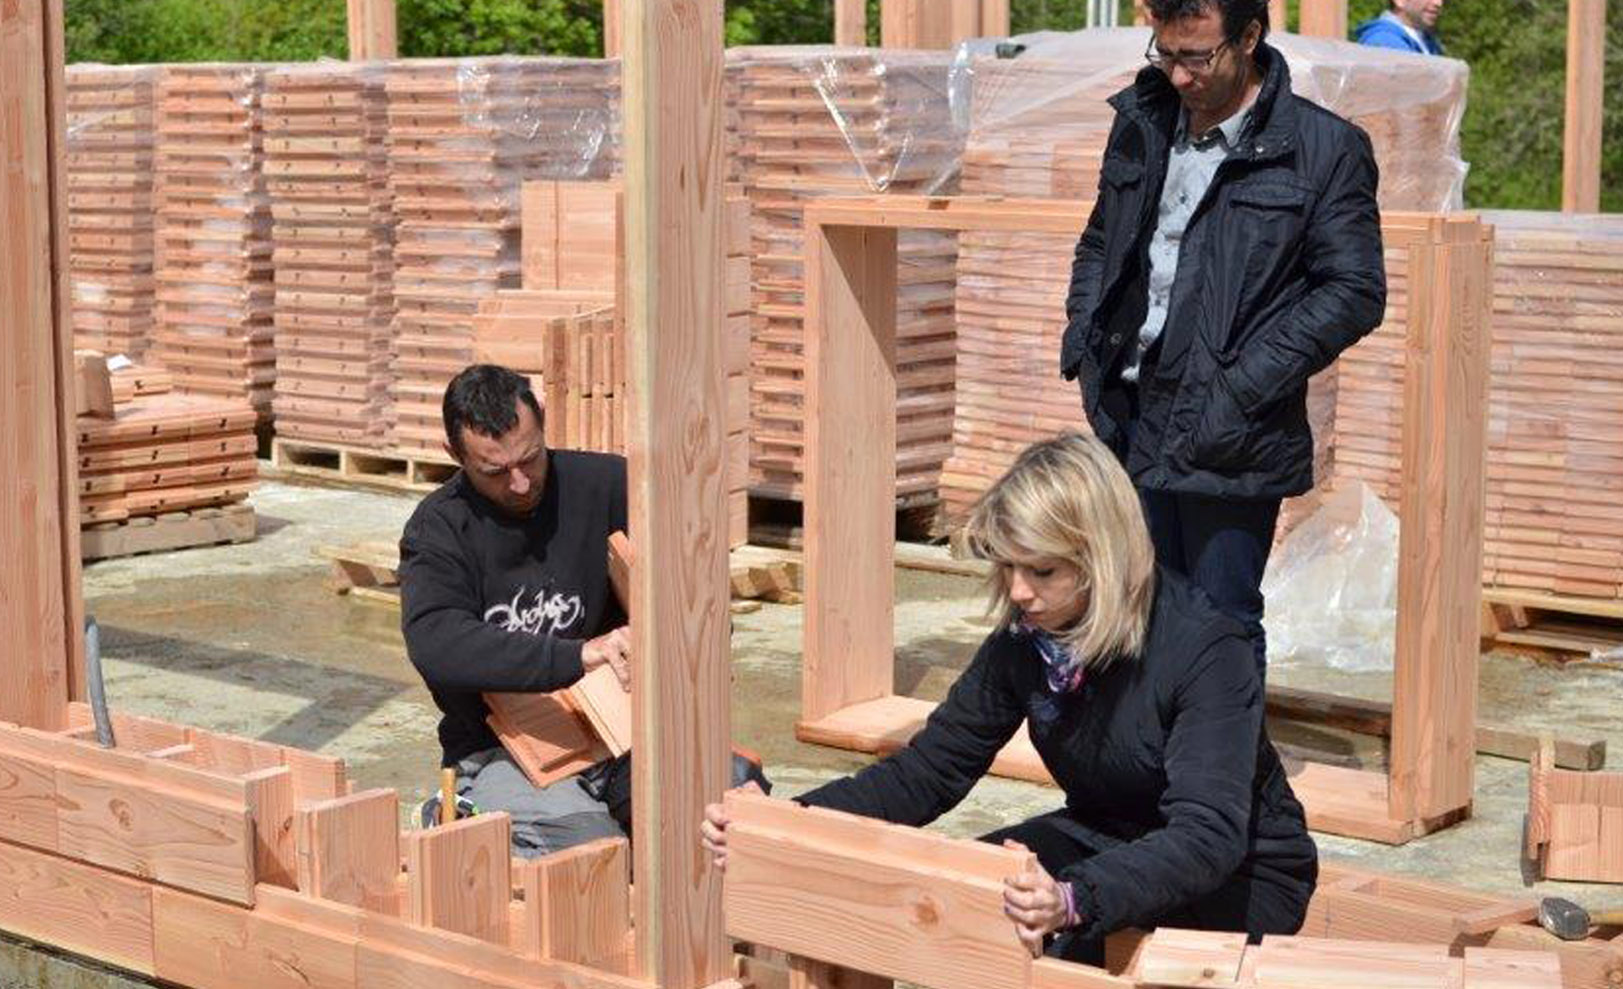 Life-Sized Lincoln Logs: Wooden Bricks Make Building a House Crazy Easy